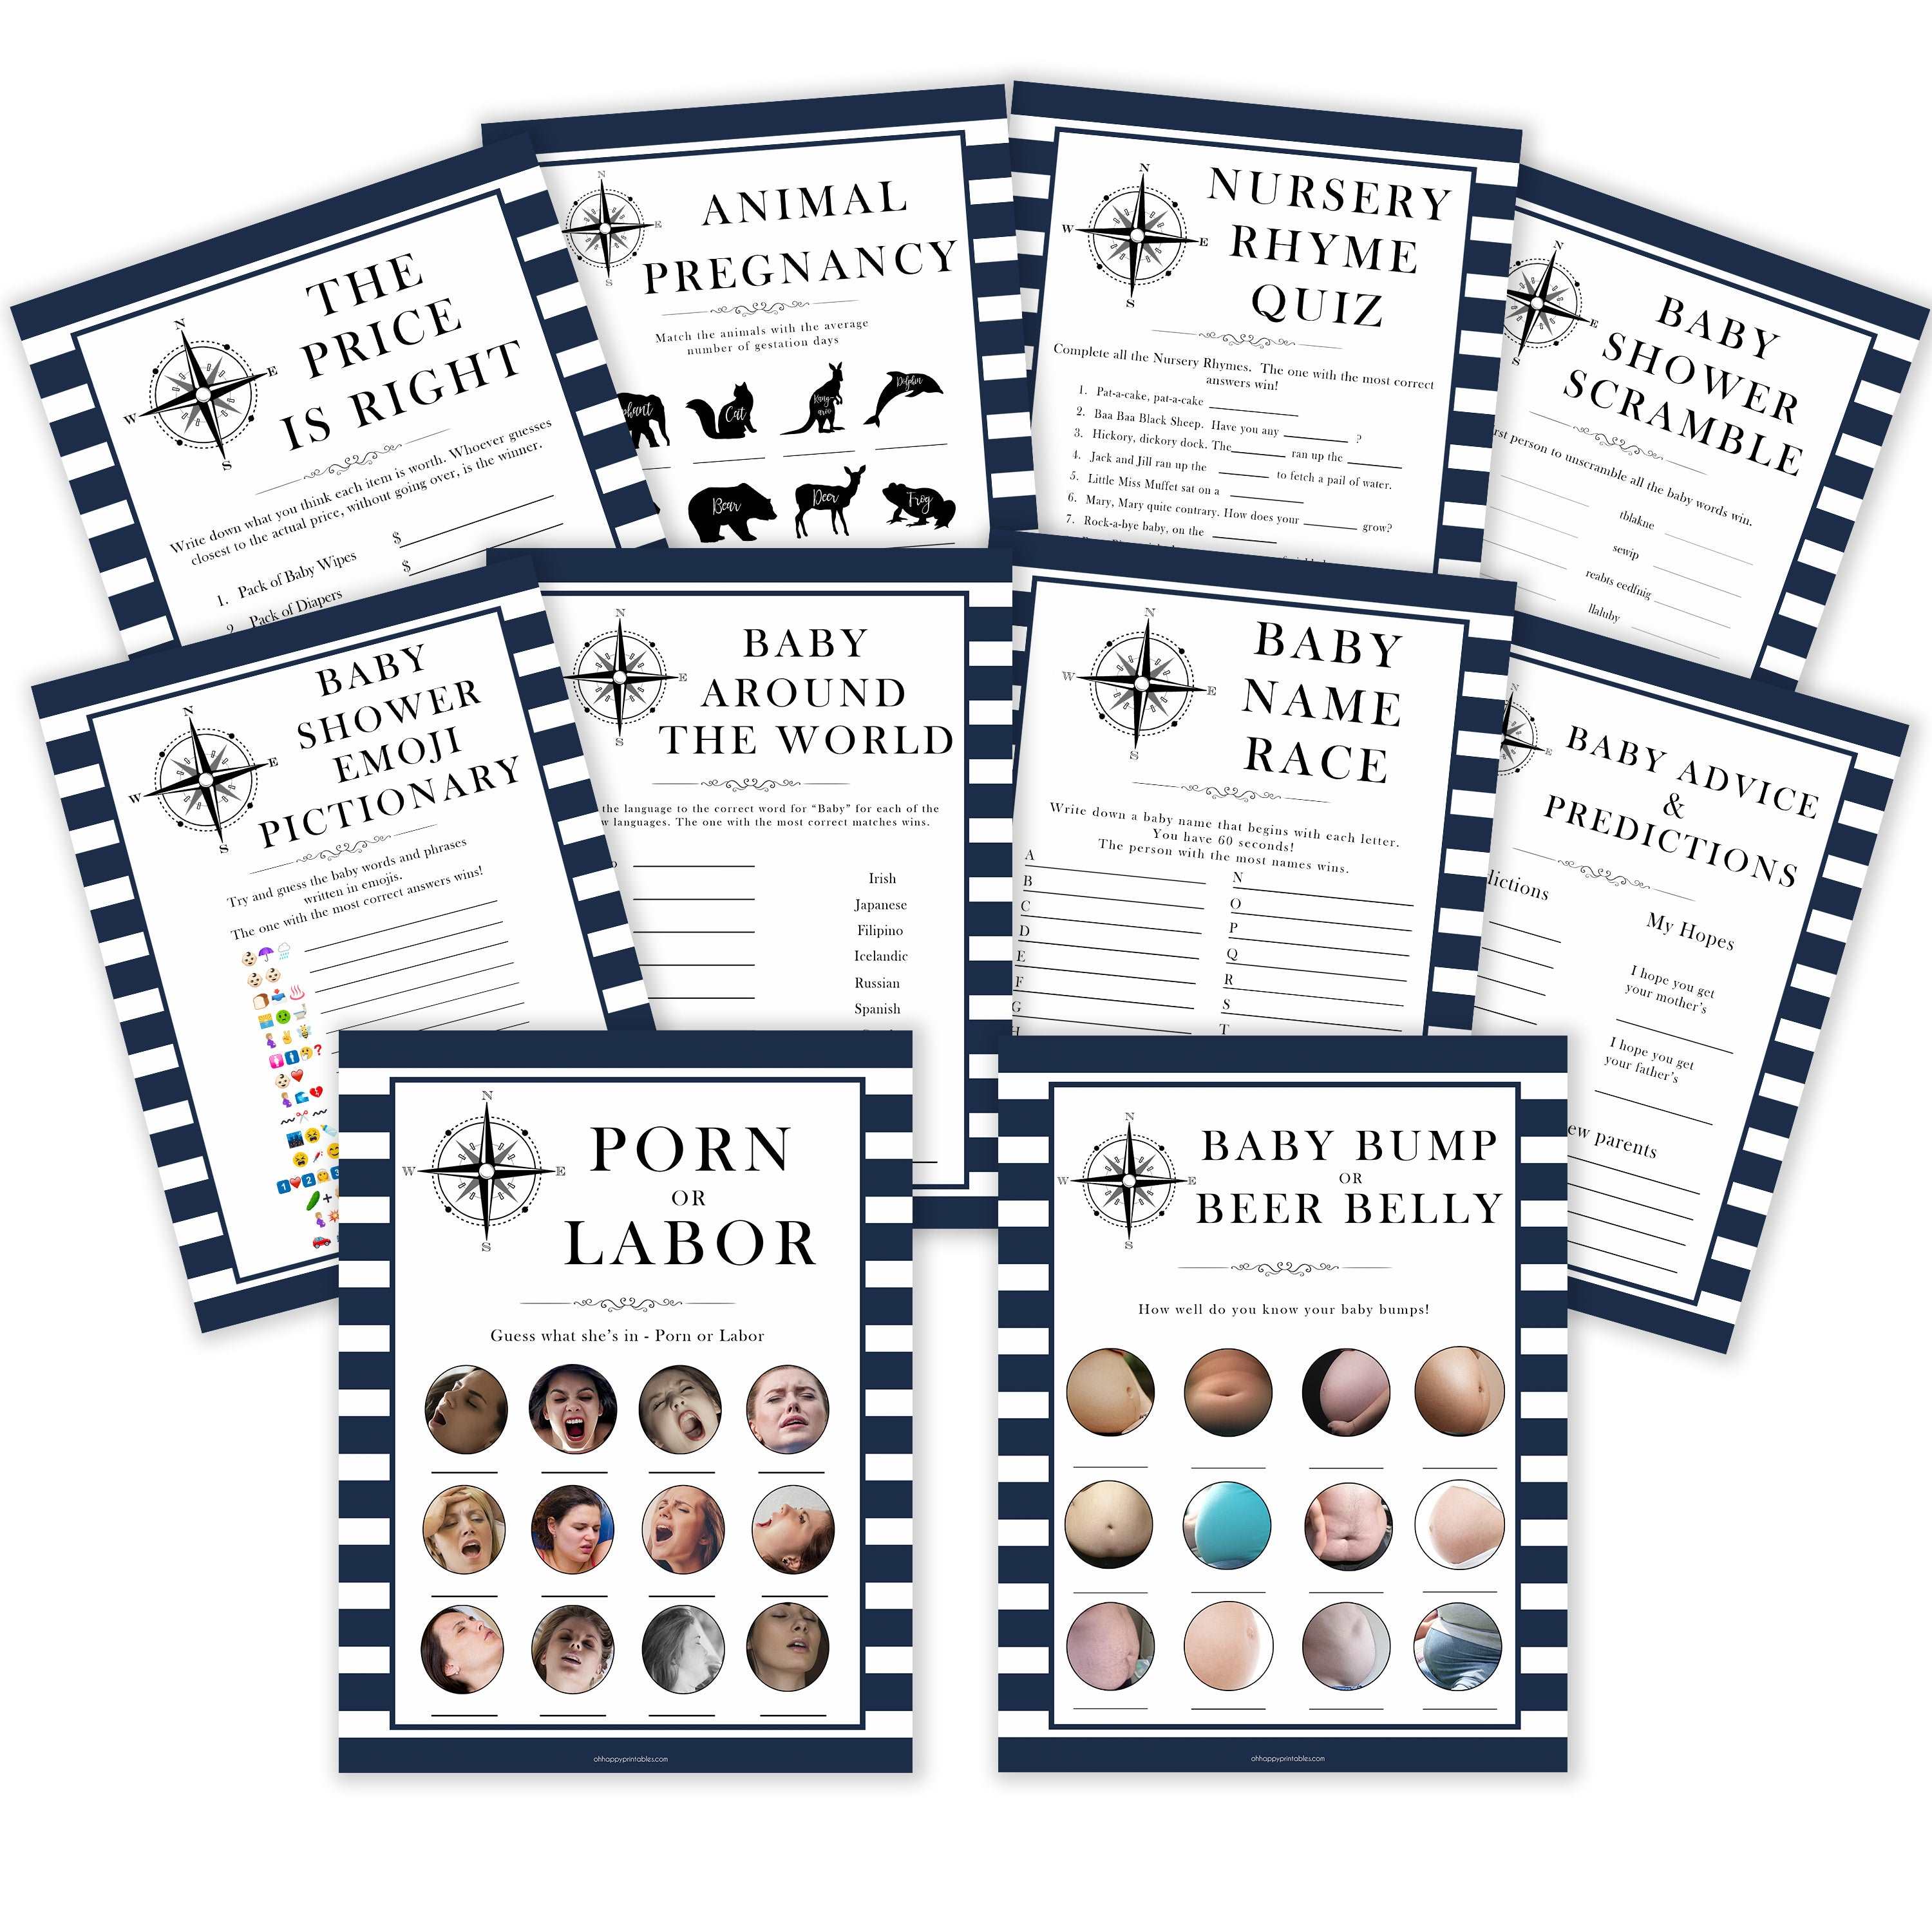 10 baby shower games, baby shower games bundles, Nautical baby shower games, baby shower games, printable baby shower games, baby shower games, fun baby games, ahoy its a boy, popular baby shower games, sailor baby games, boat baby game